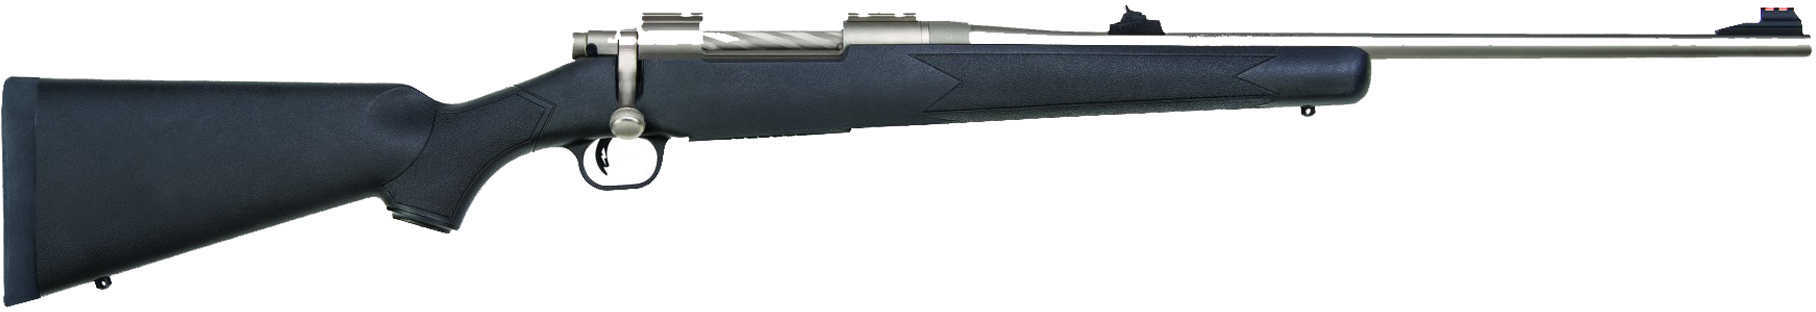 Mossberg Patriot 375 Ruger 22'' Barrel Synthetic Stock Marinecote Bolt Action Rifle